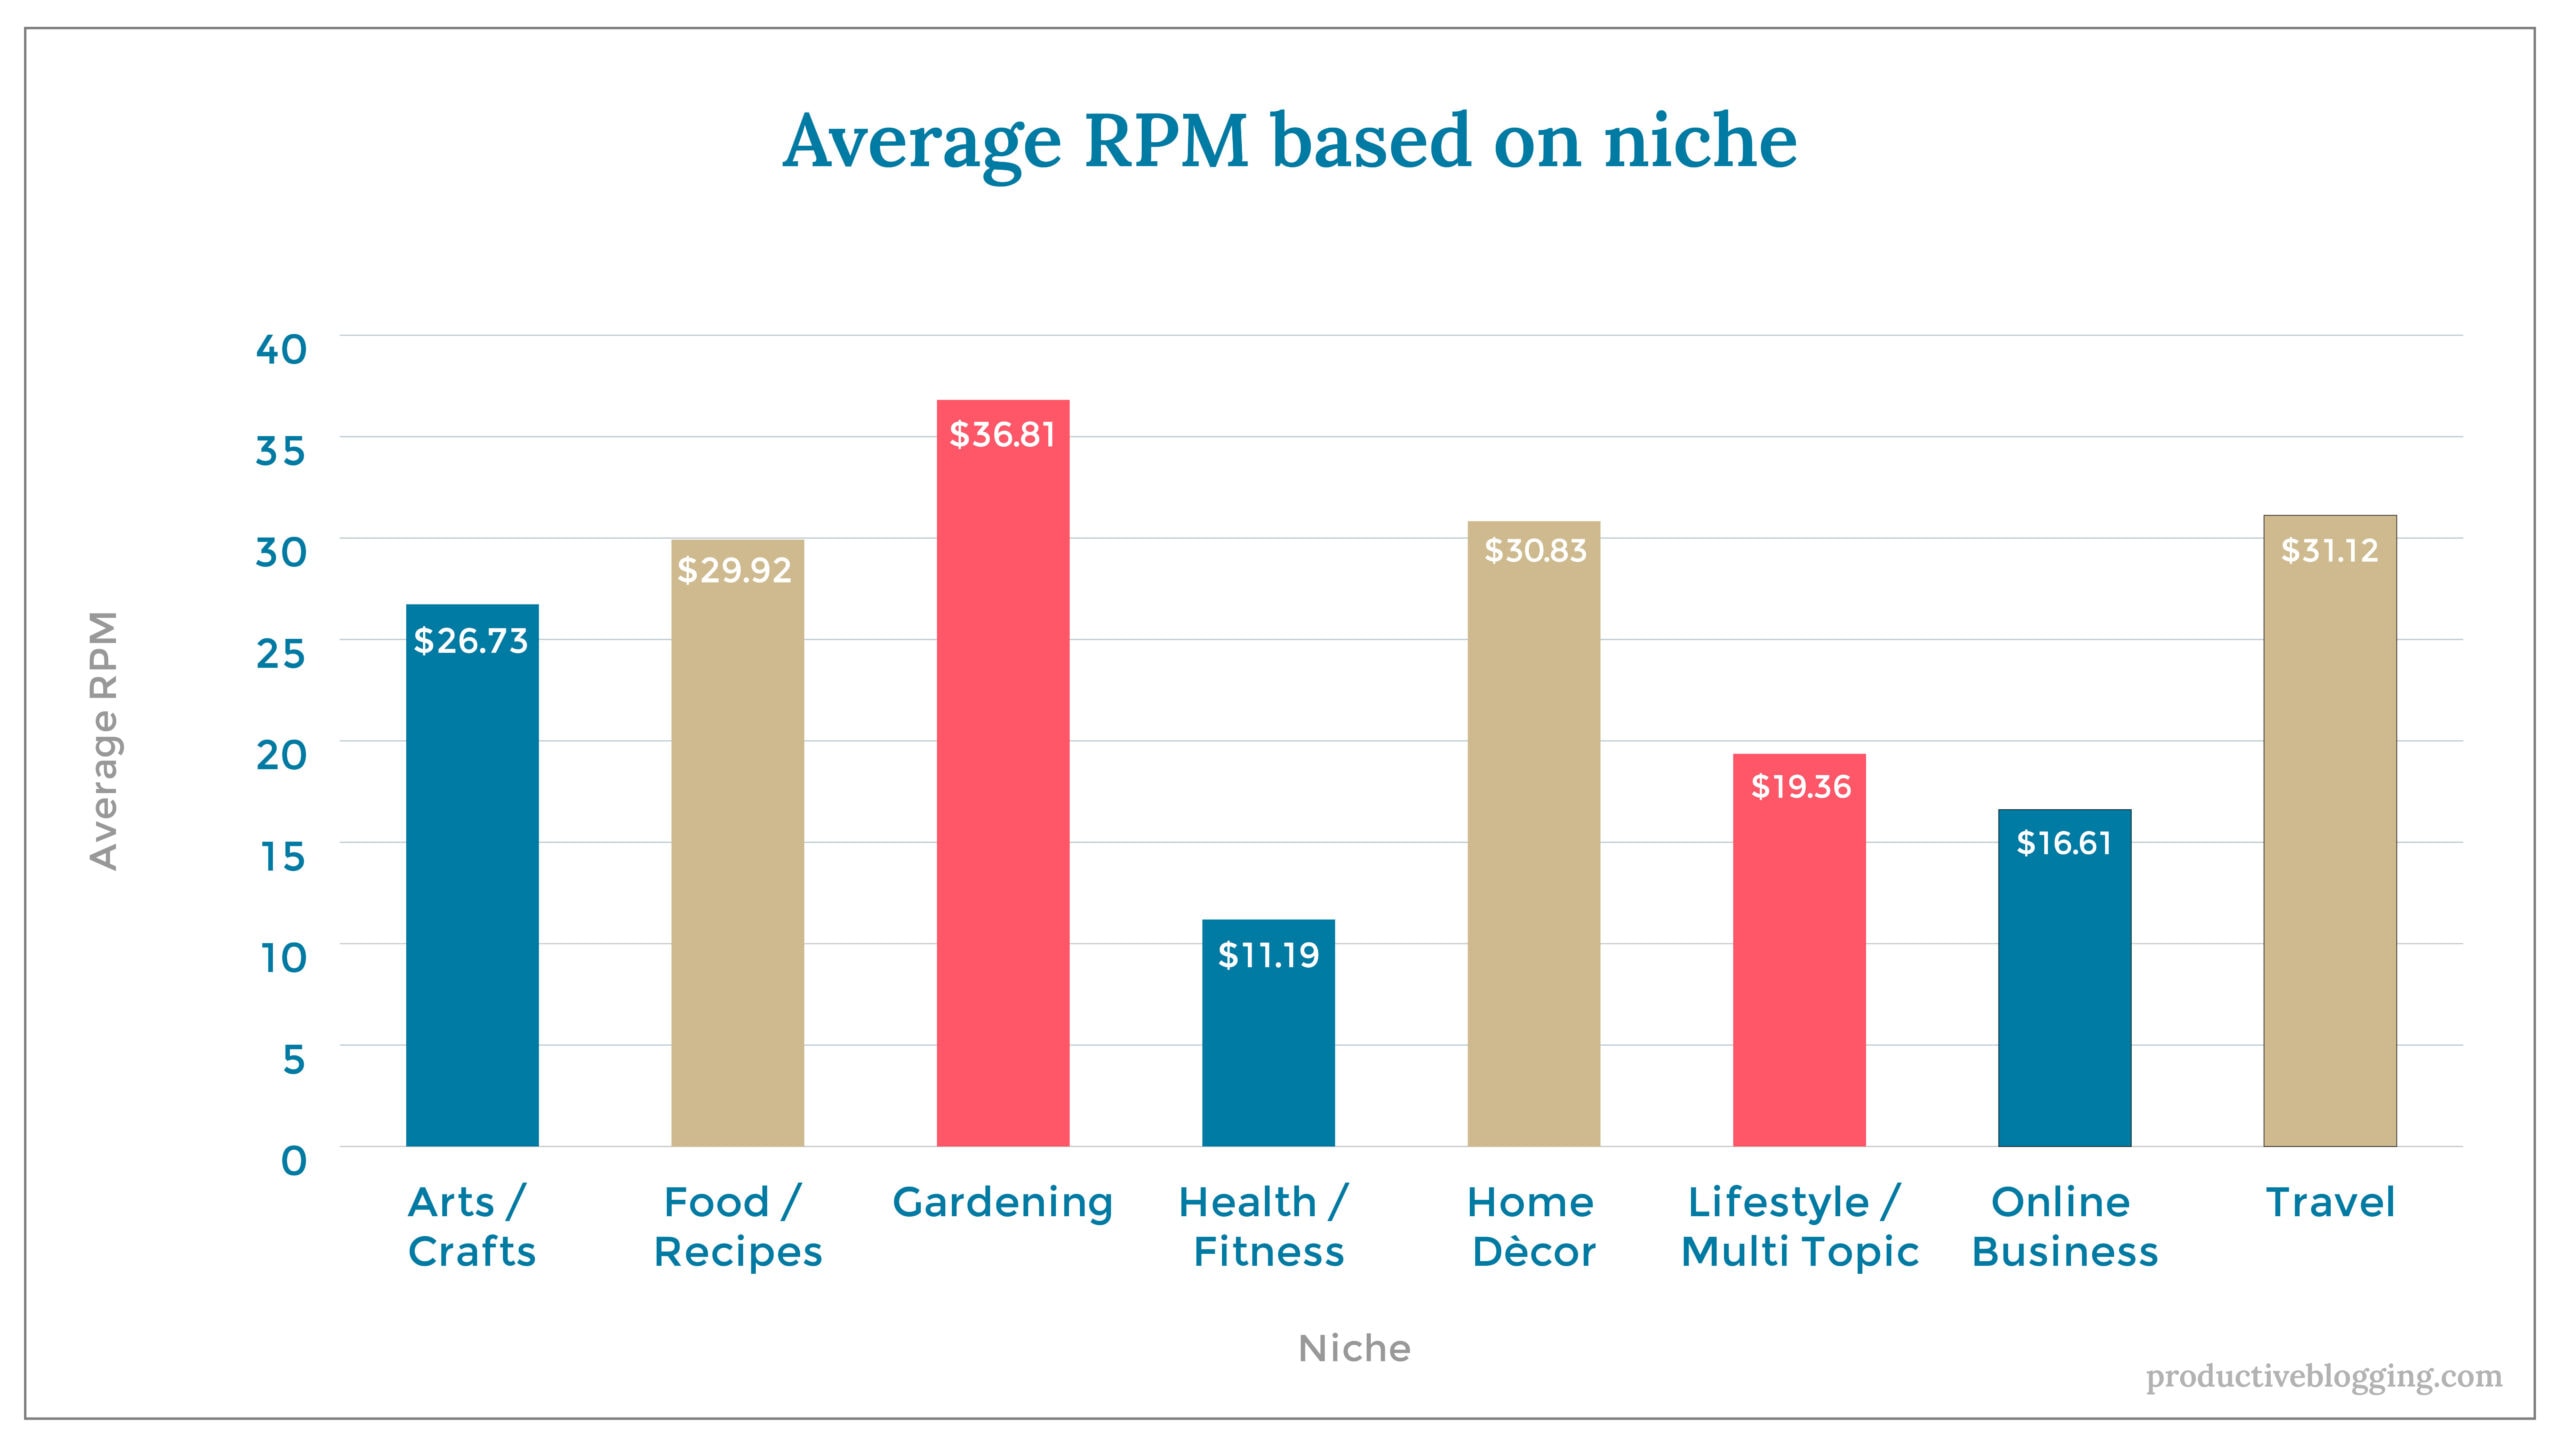 Average RPM based on nicheX axis: NicheY axis: Average RPMArts / Crafts		$26.73Food / Recipes		$29.92Gardening		$36.81Health / Fitness		$11.19Home décor 		$30.83Lifestyle / Multi Topic	$19.36Online Business		$16.61Travel			$31.12